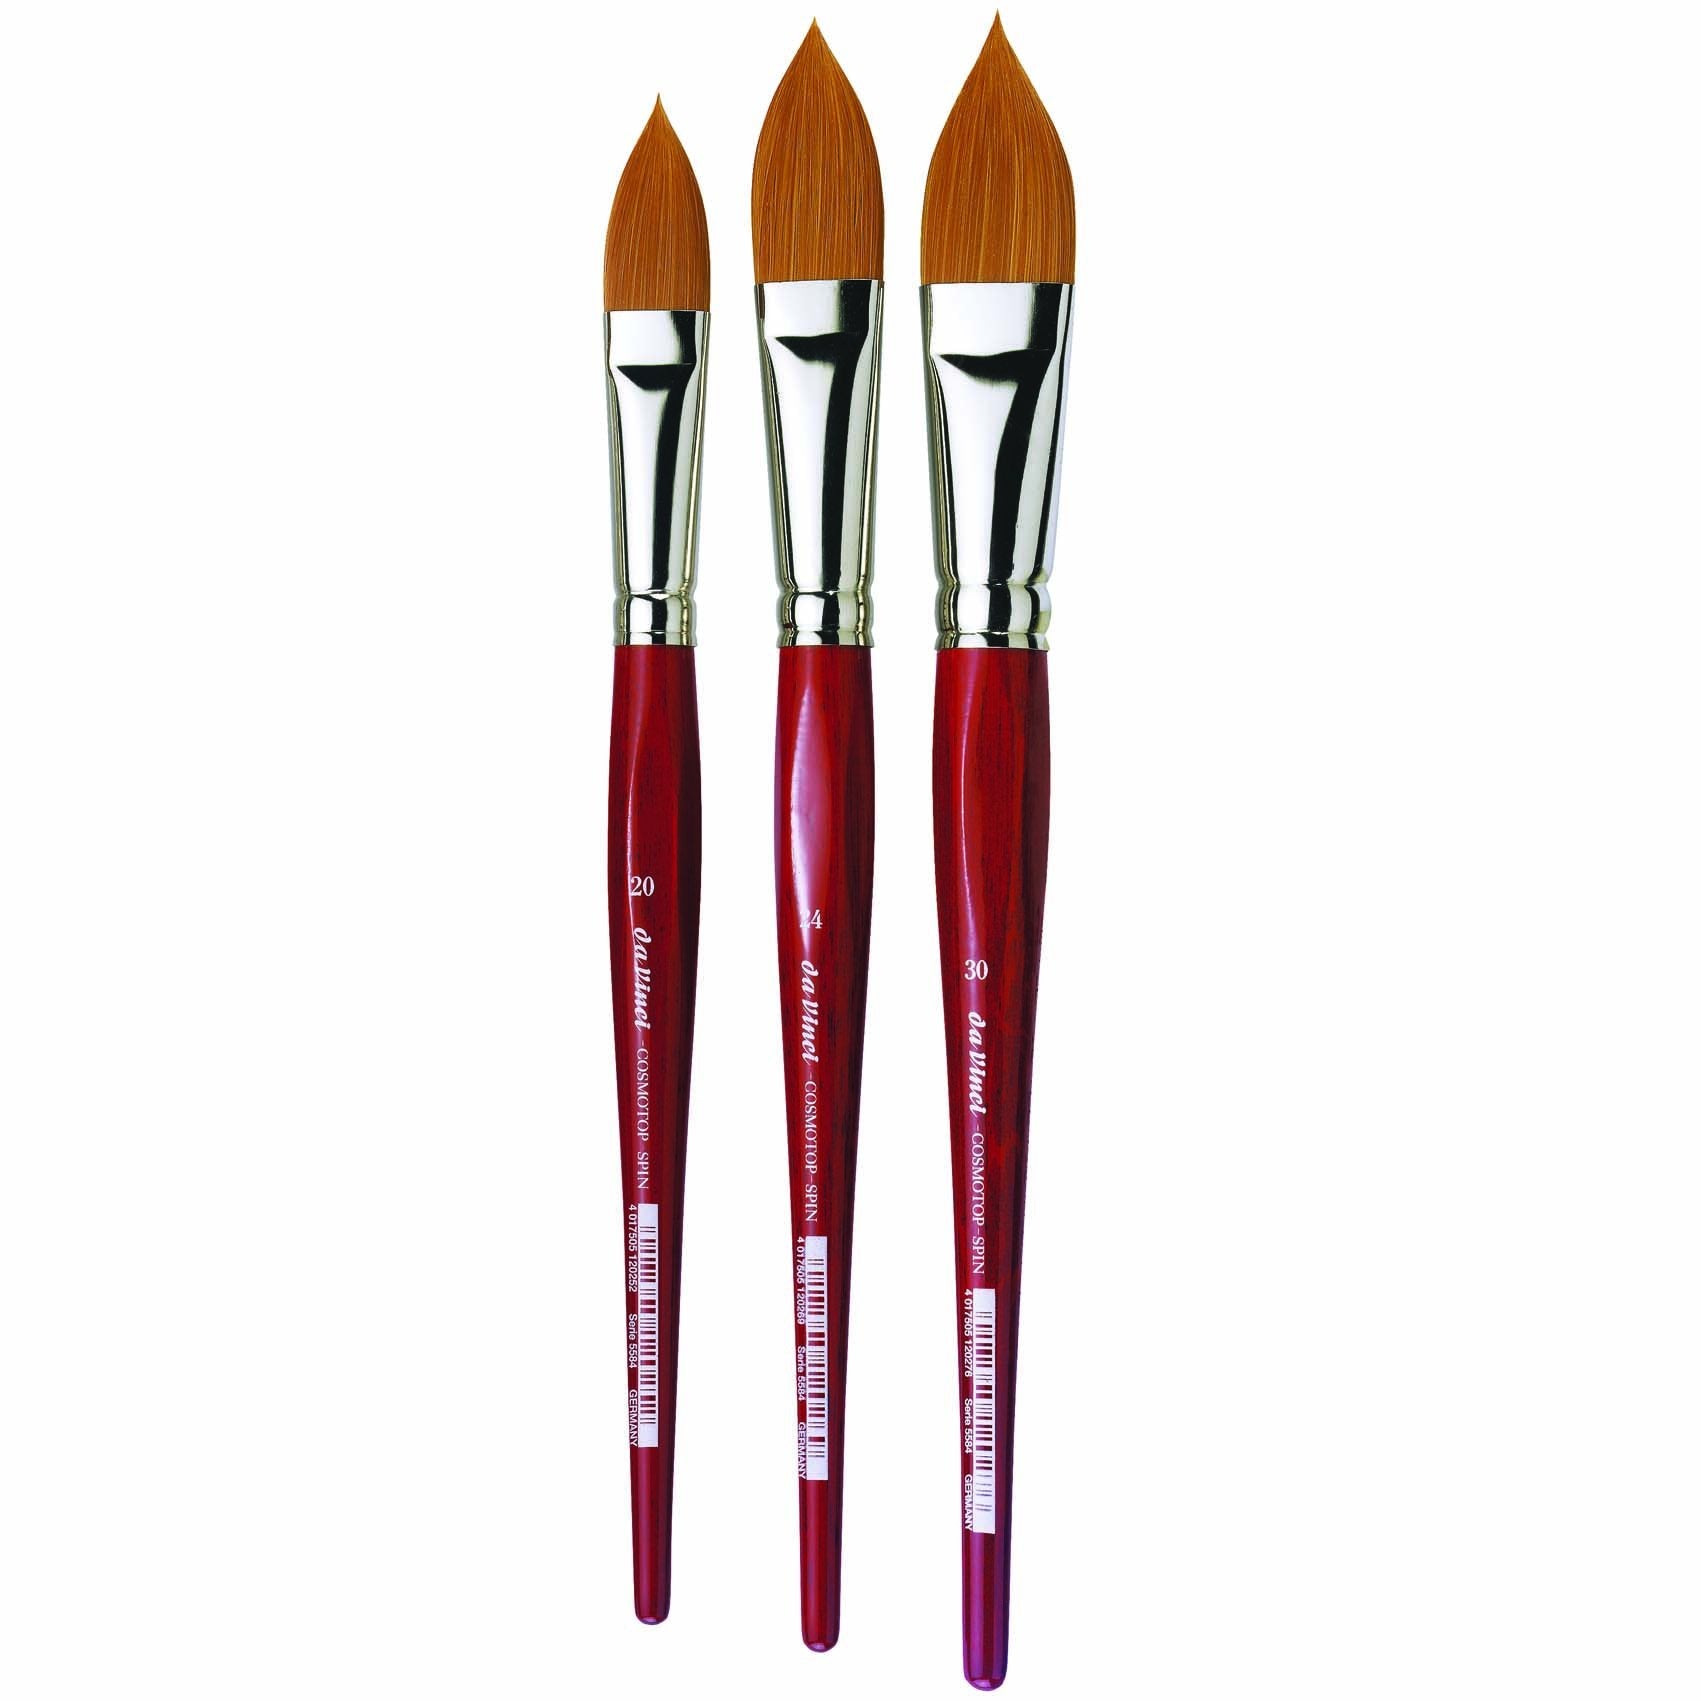 The Cosmotop Spin brush is made with five extra smooth different diameters of light brown synthetic fibre. The biggest on the outside for water-holding properties, the finest in the middle to ensure high colour absorption while maintaining a fine point, stable shape, and good spring. This brush is suitable for all liquid colours, especially for watercolour and silk painting.